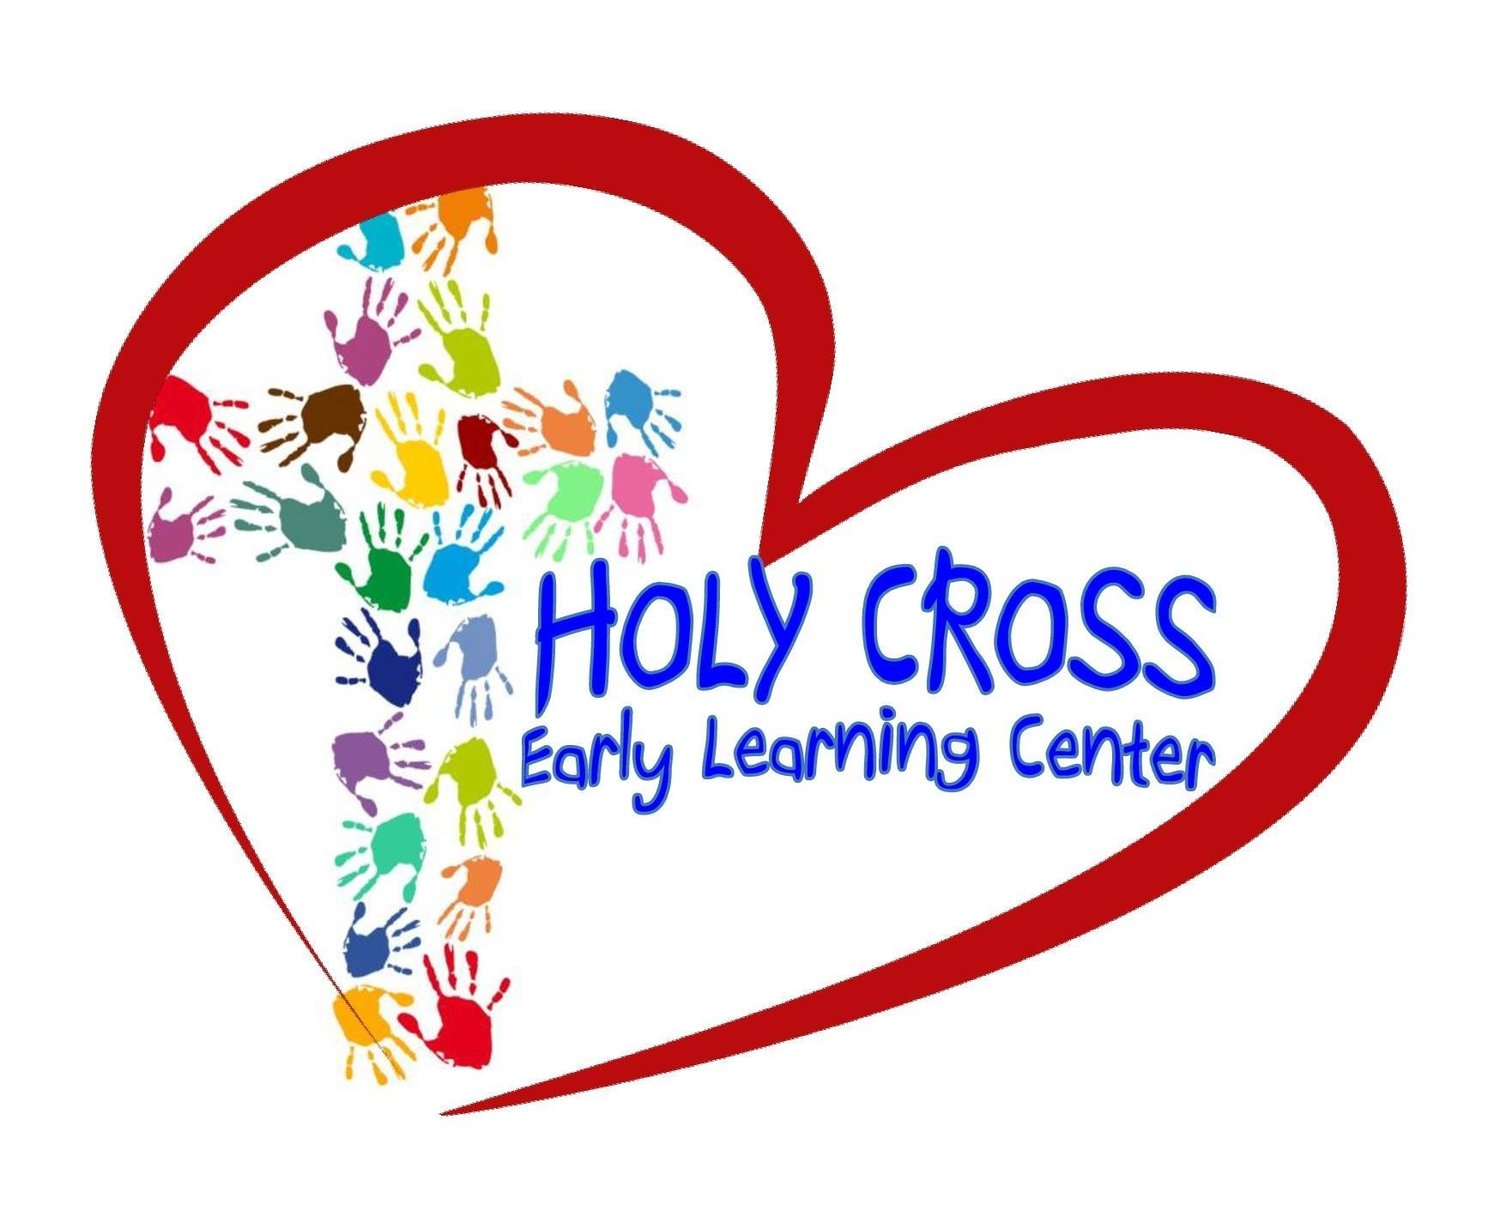 Holy Cross Early Learning Center